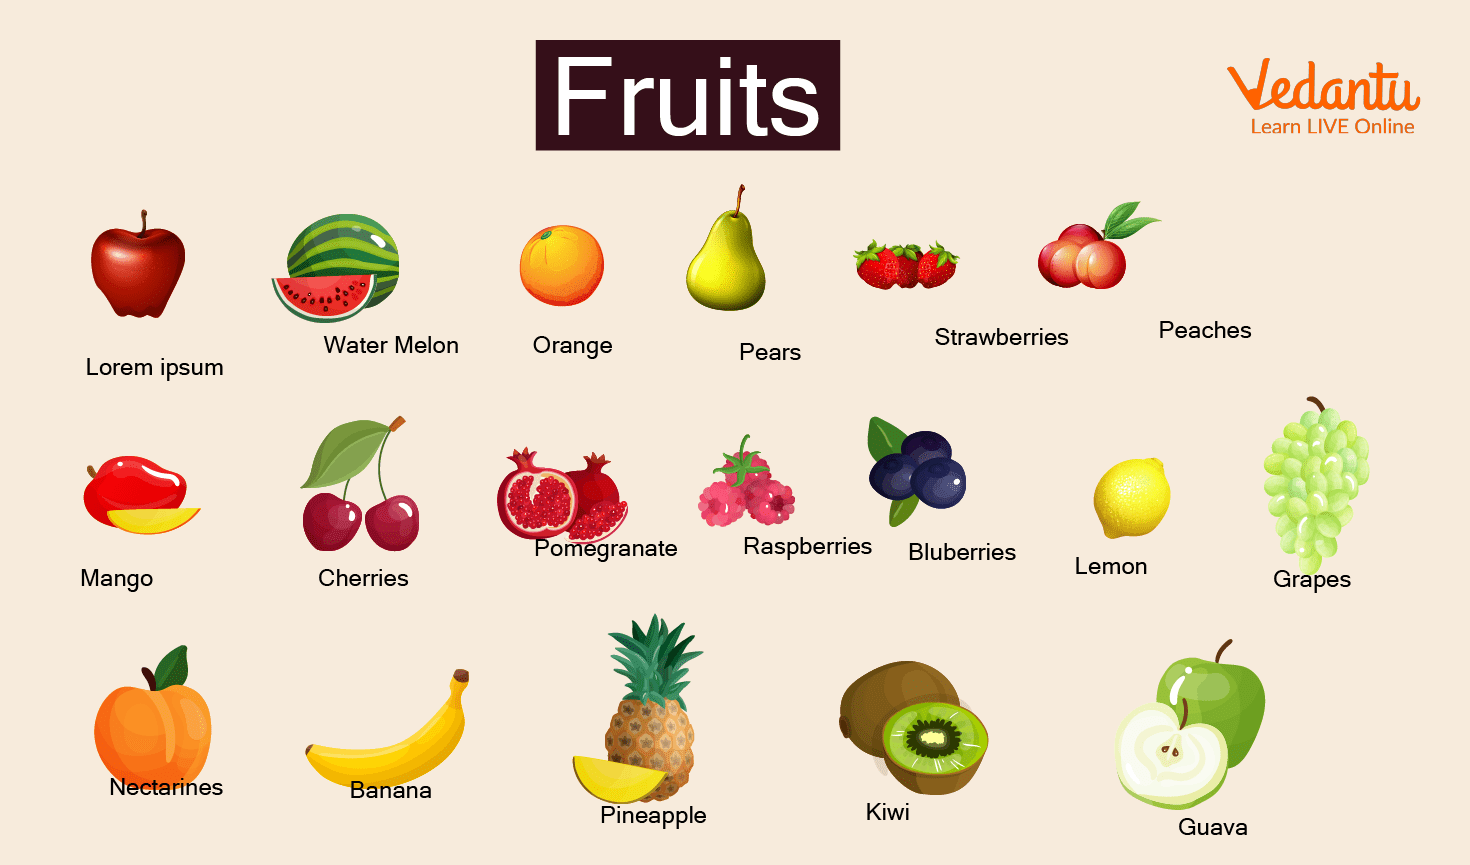 Variety of Fruits